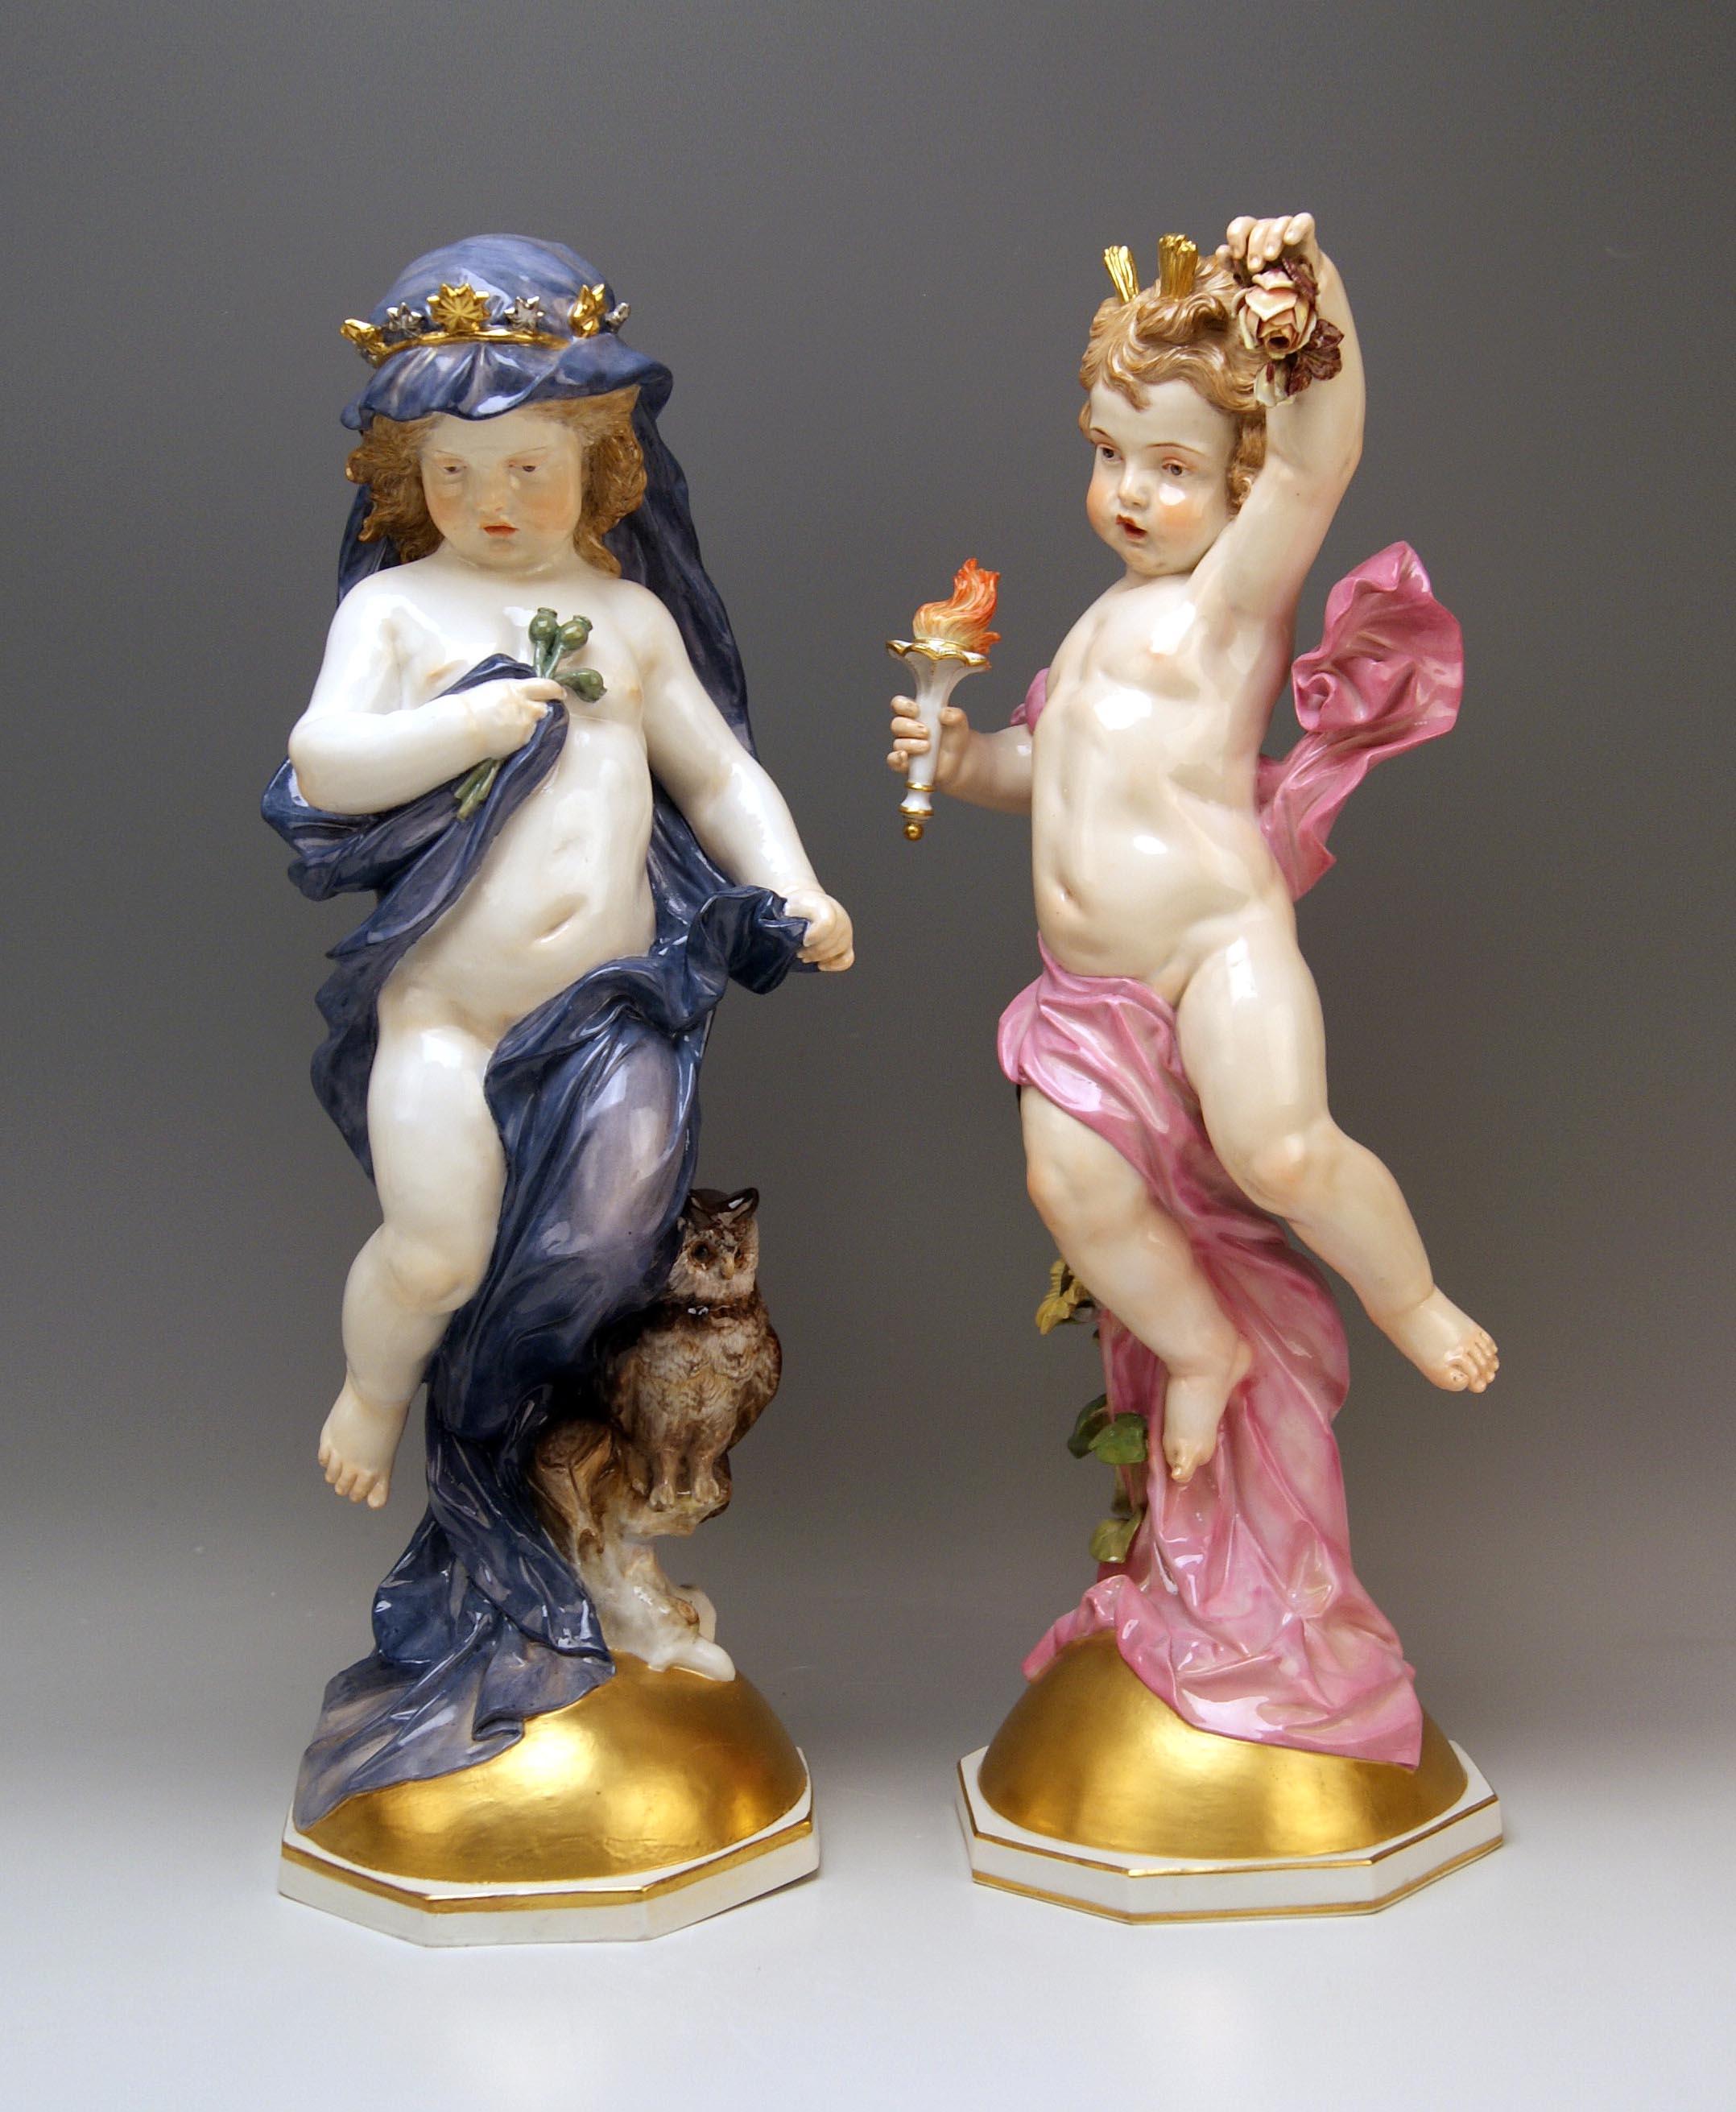 Meissen lovely pair of figurines: Day and night

Day: model number l 134 / former's nr. 137
Measures: Height 20.47 inches (52 cm)
Night: model number l 135 / former's number 111 / painter's nr. 57
Height: 20.47 inches (52 cm)

Manufactory: